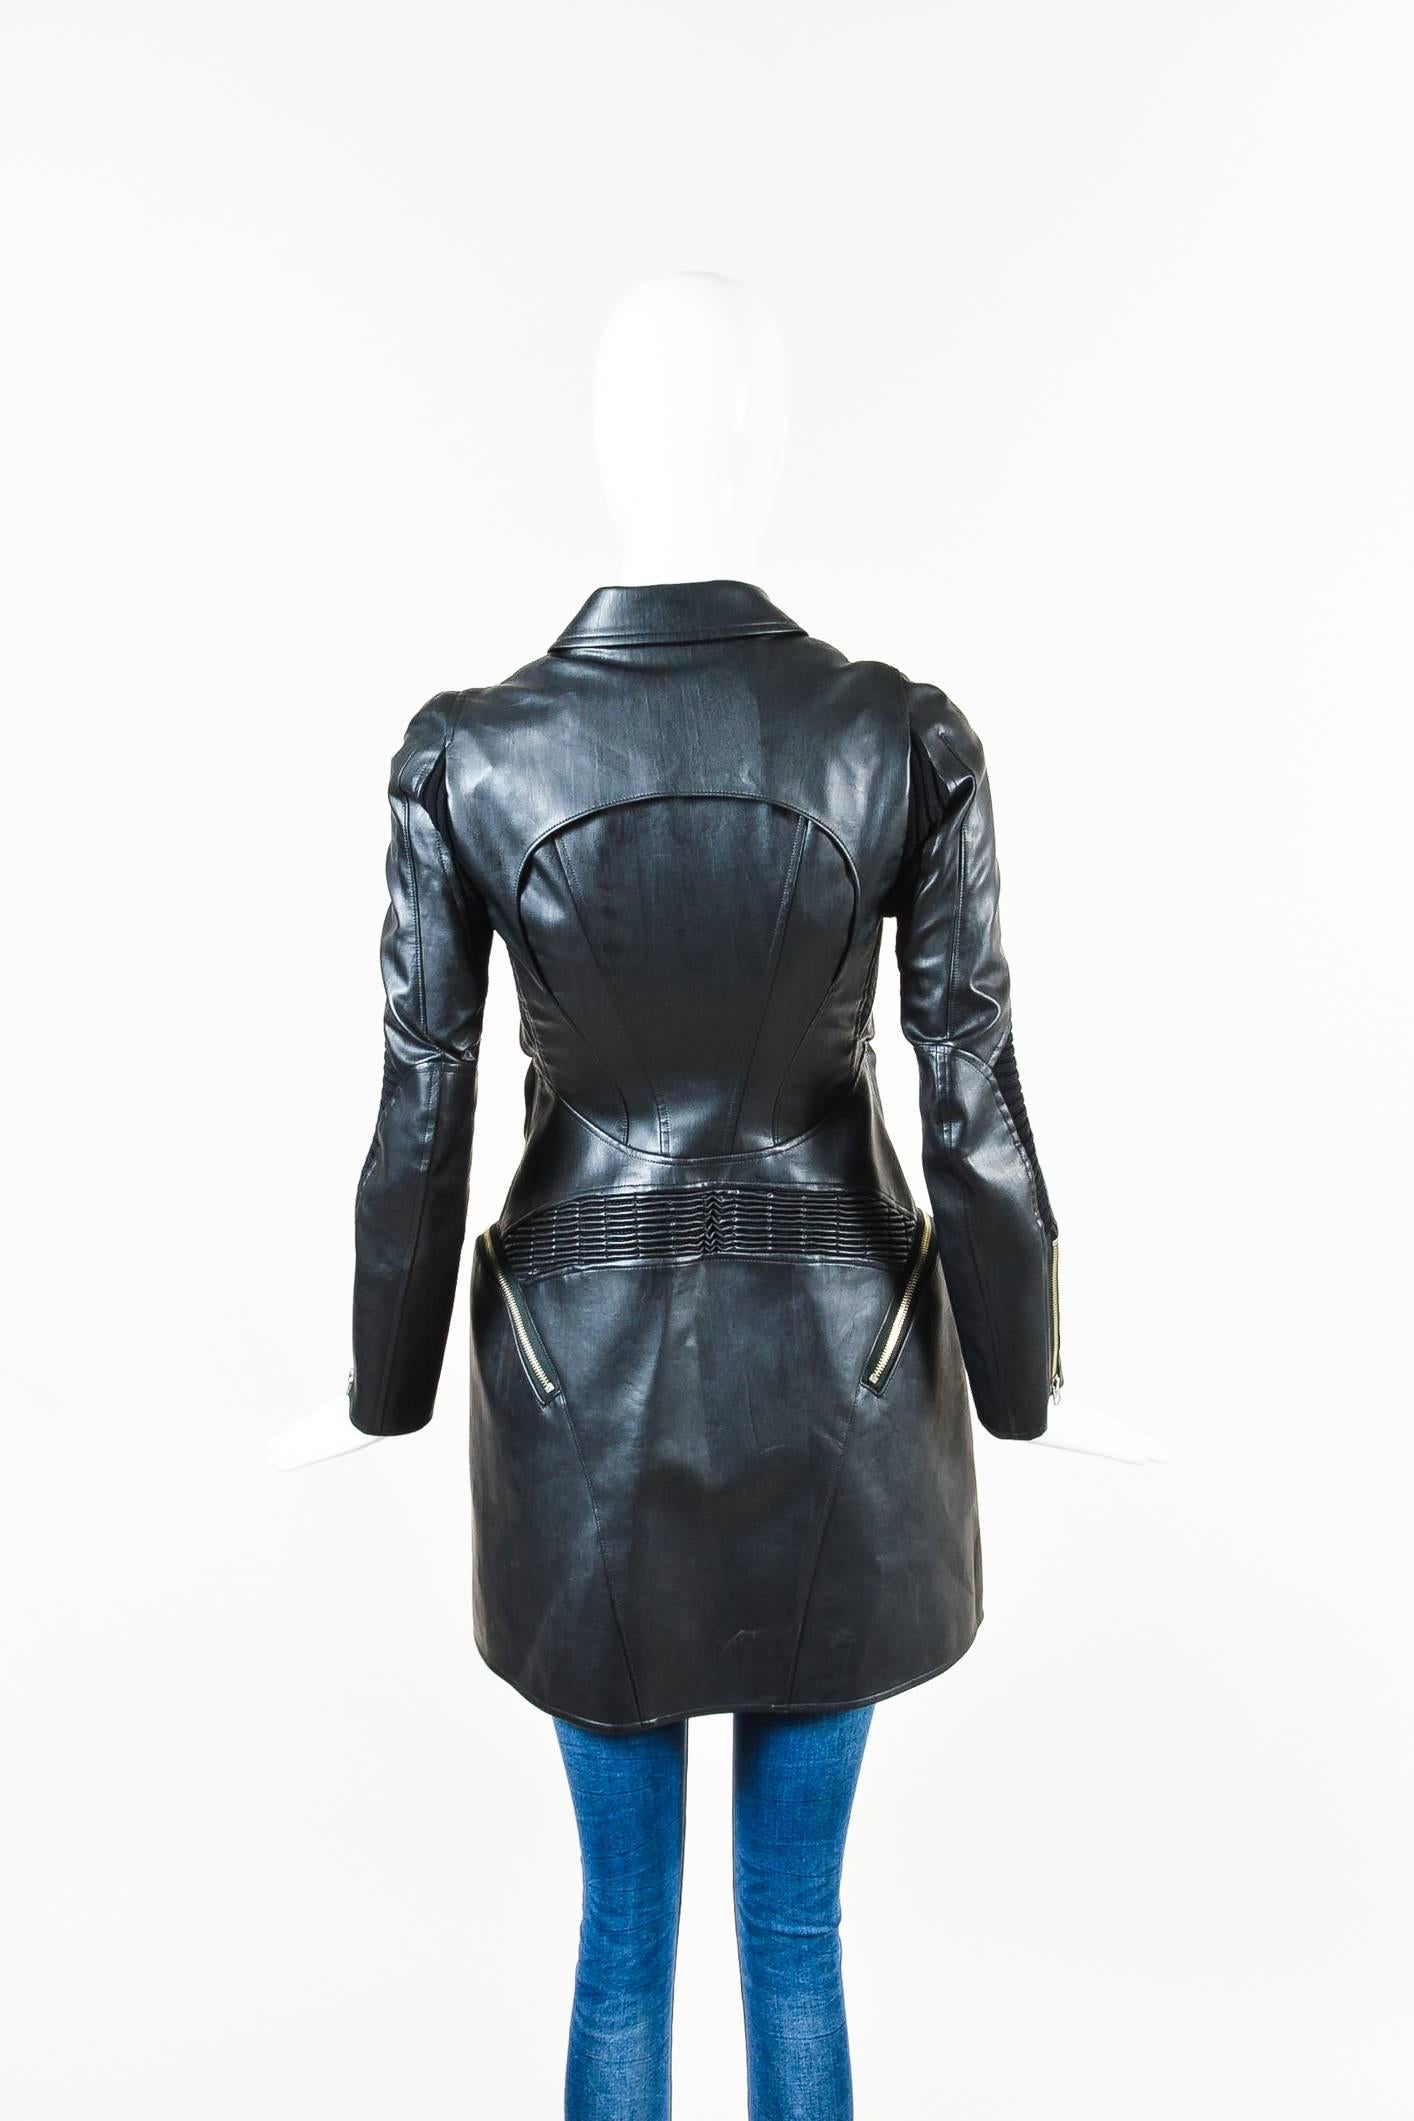 Smooth faux leather construction. Ribbed knit panels. Front gun flaps and back yoke. Exterior zip pockets. Spread collar. Long sleeves. Front double zip closure and center snap button closure. Lined.

Additional measurements: Sleeve Length 24